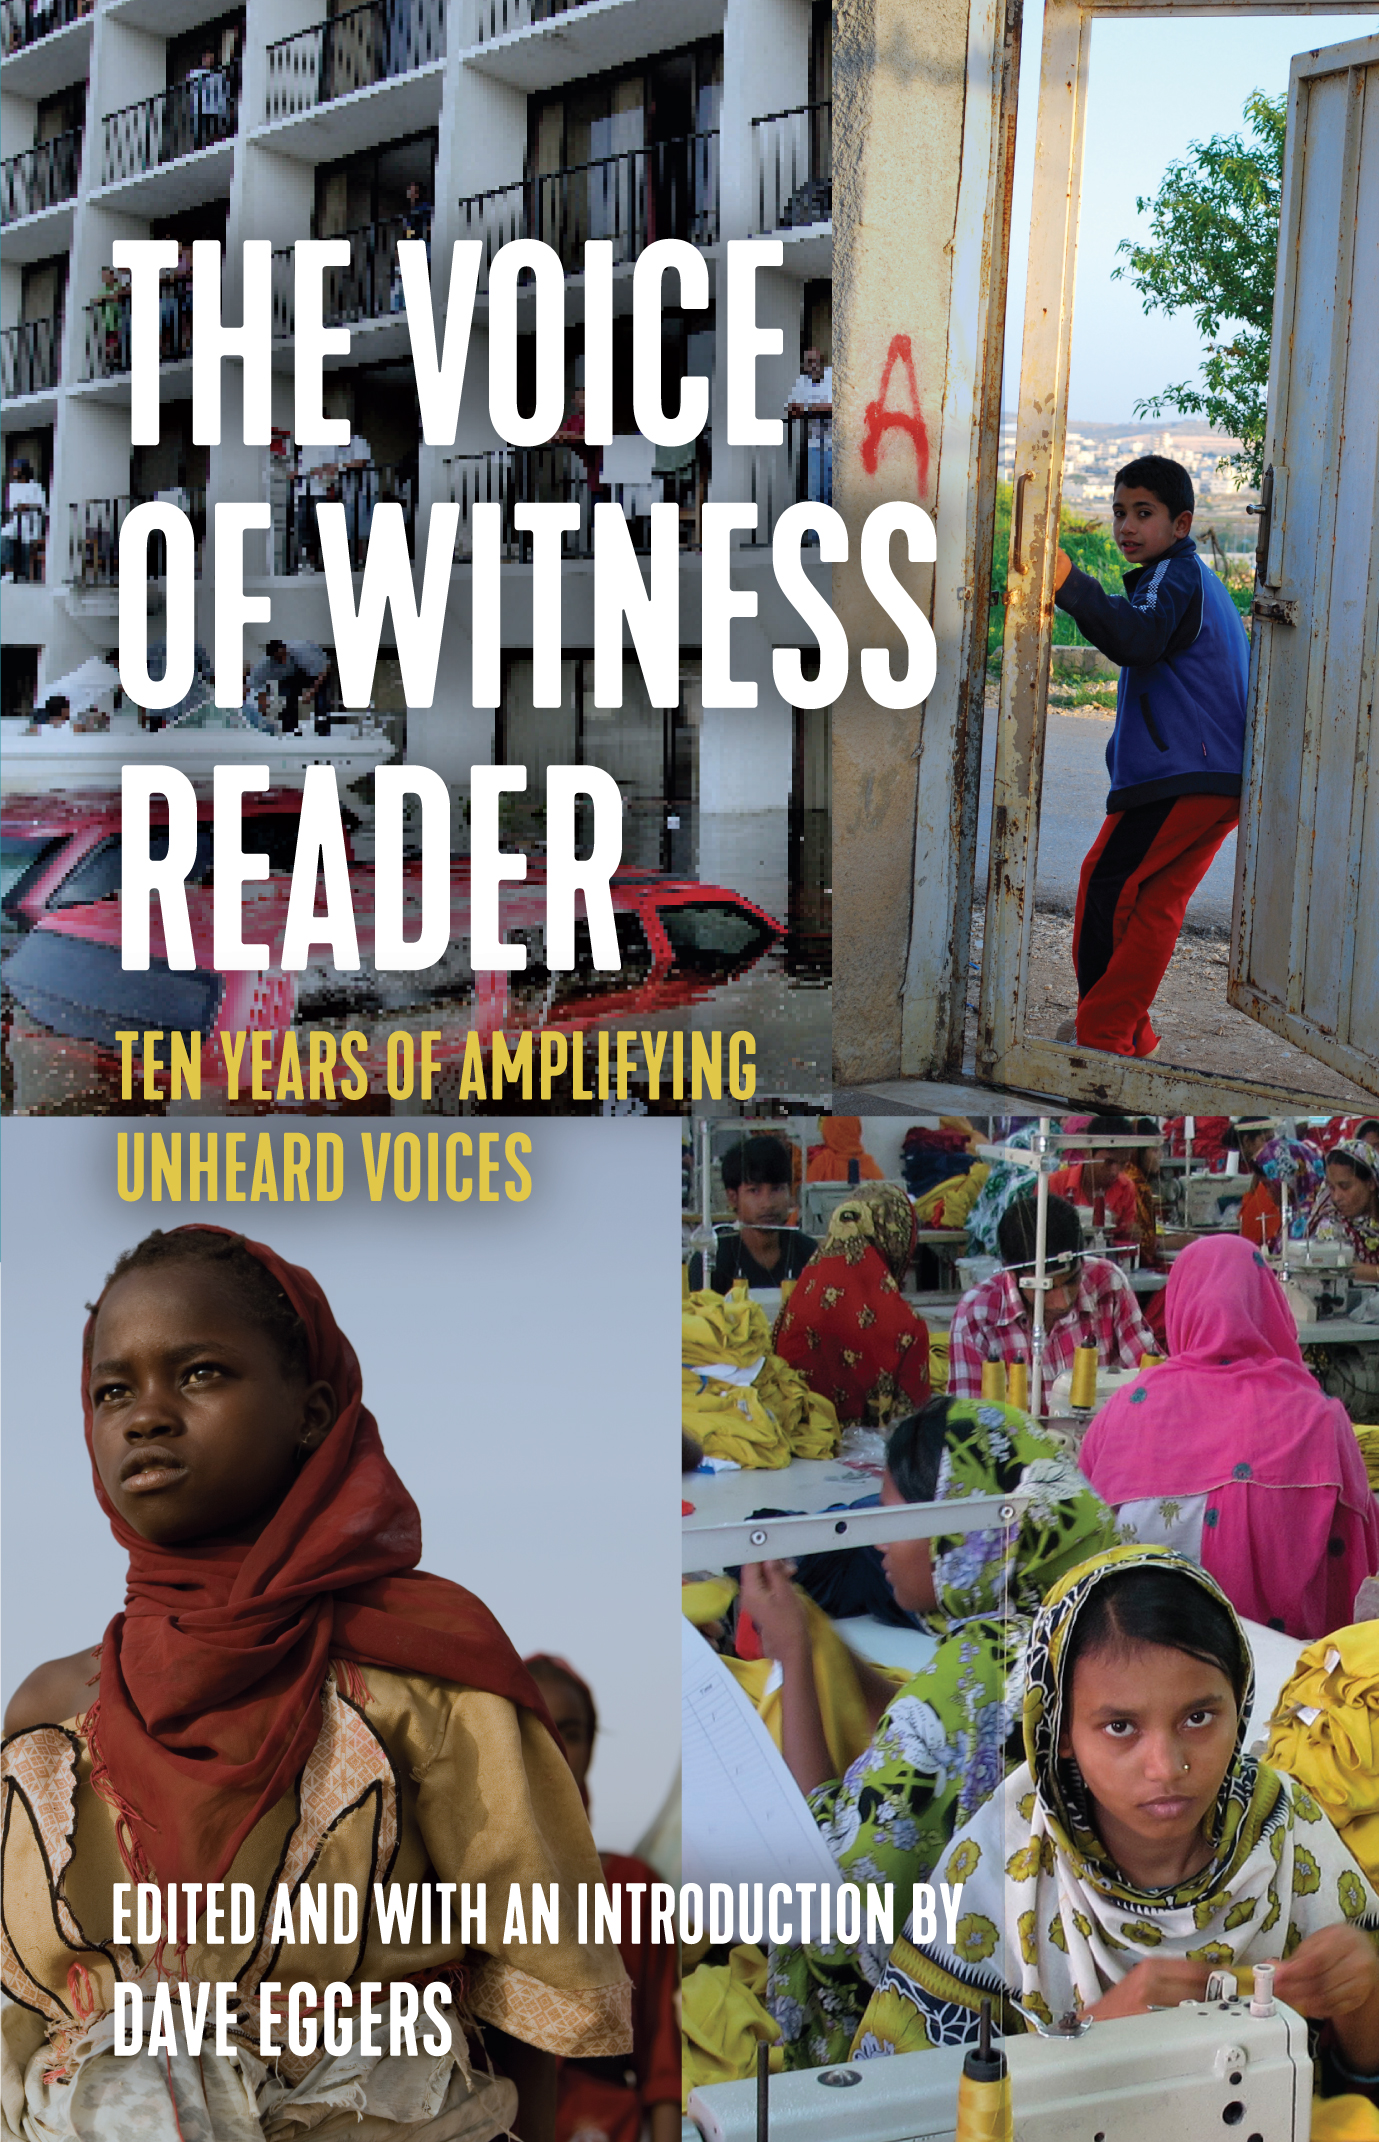 Book Club Discussion Questions: The Voice of Witness Reader